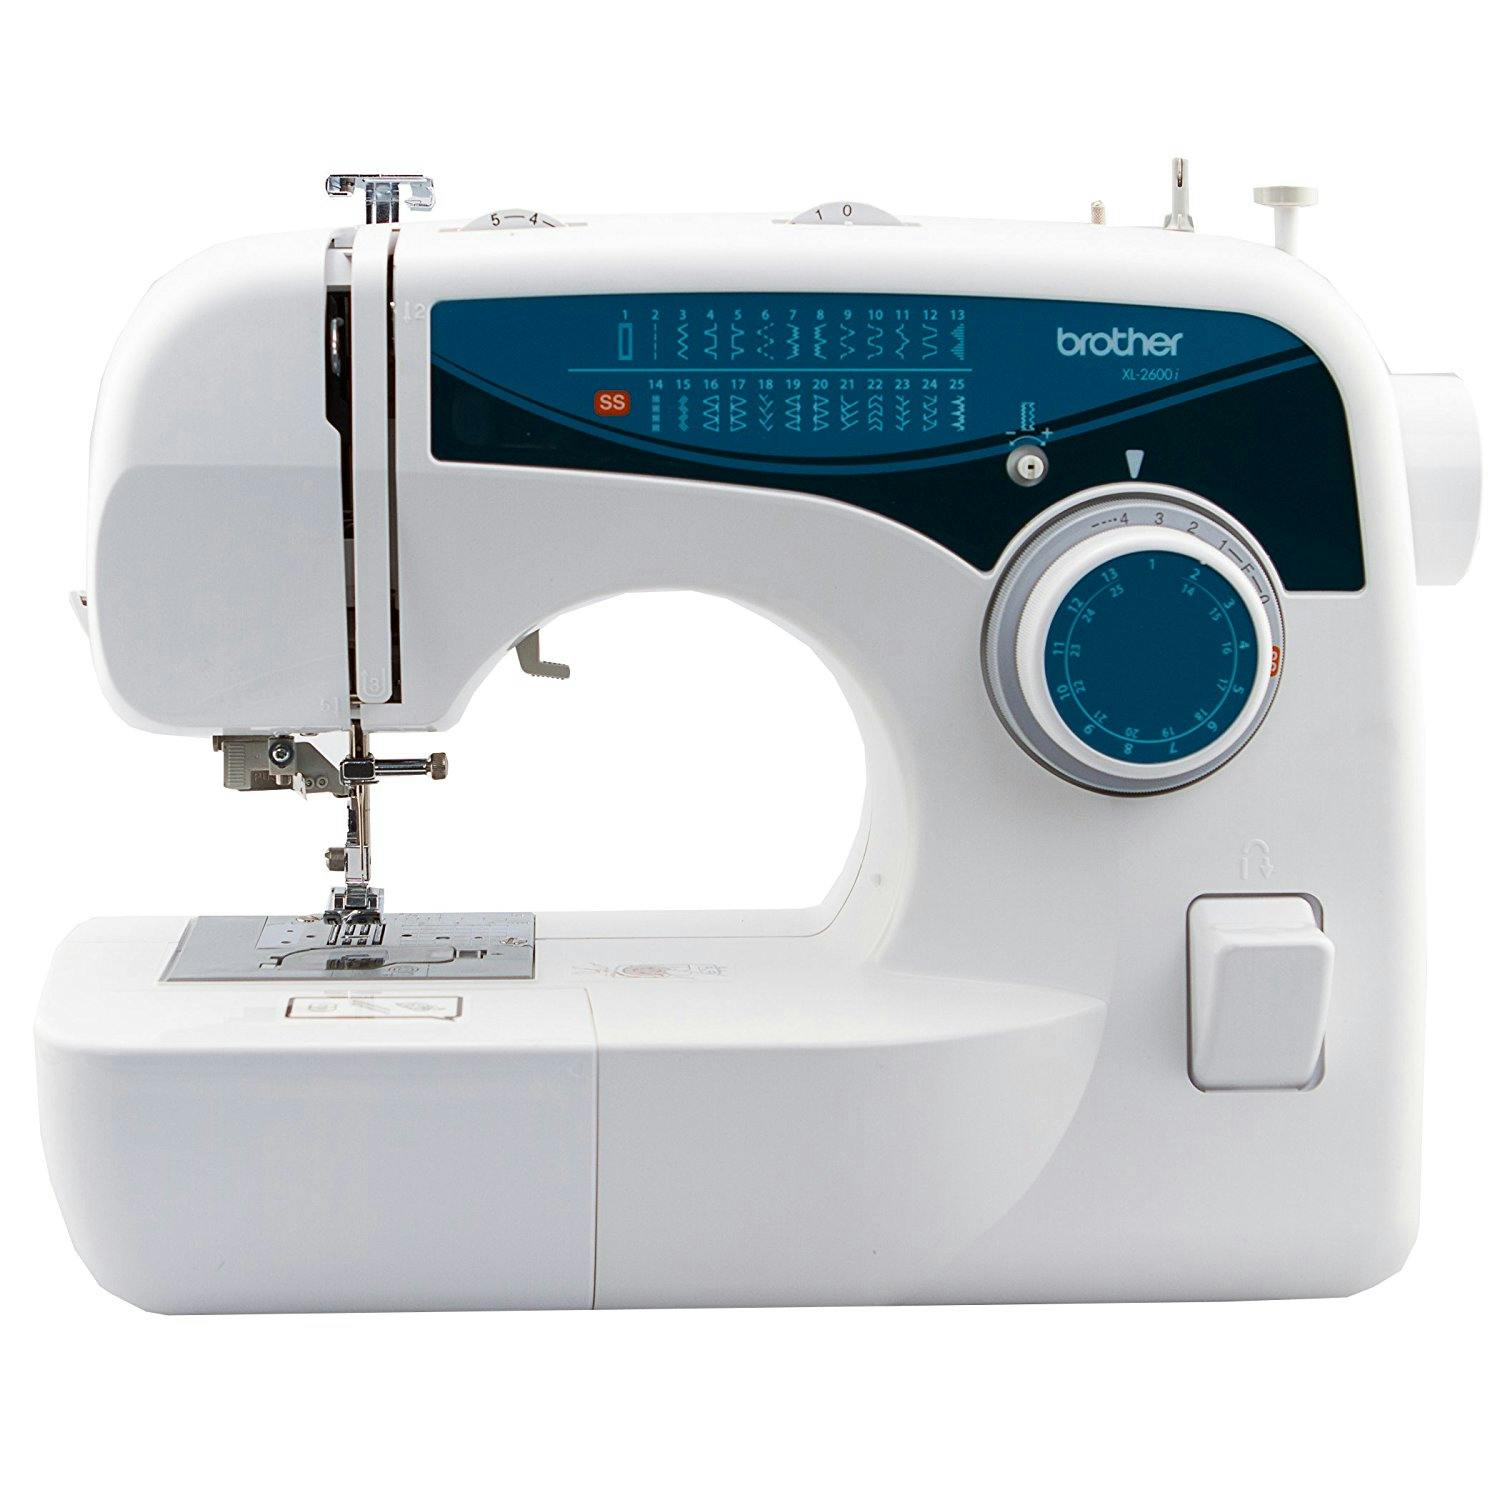 ThreeBrothers Link Three Brothers sewing machine Manual Sewing